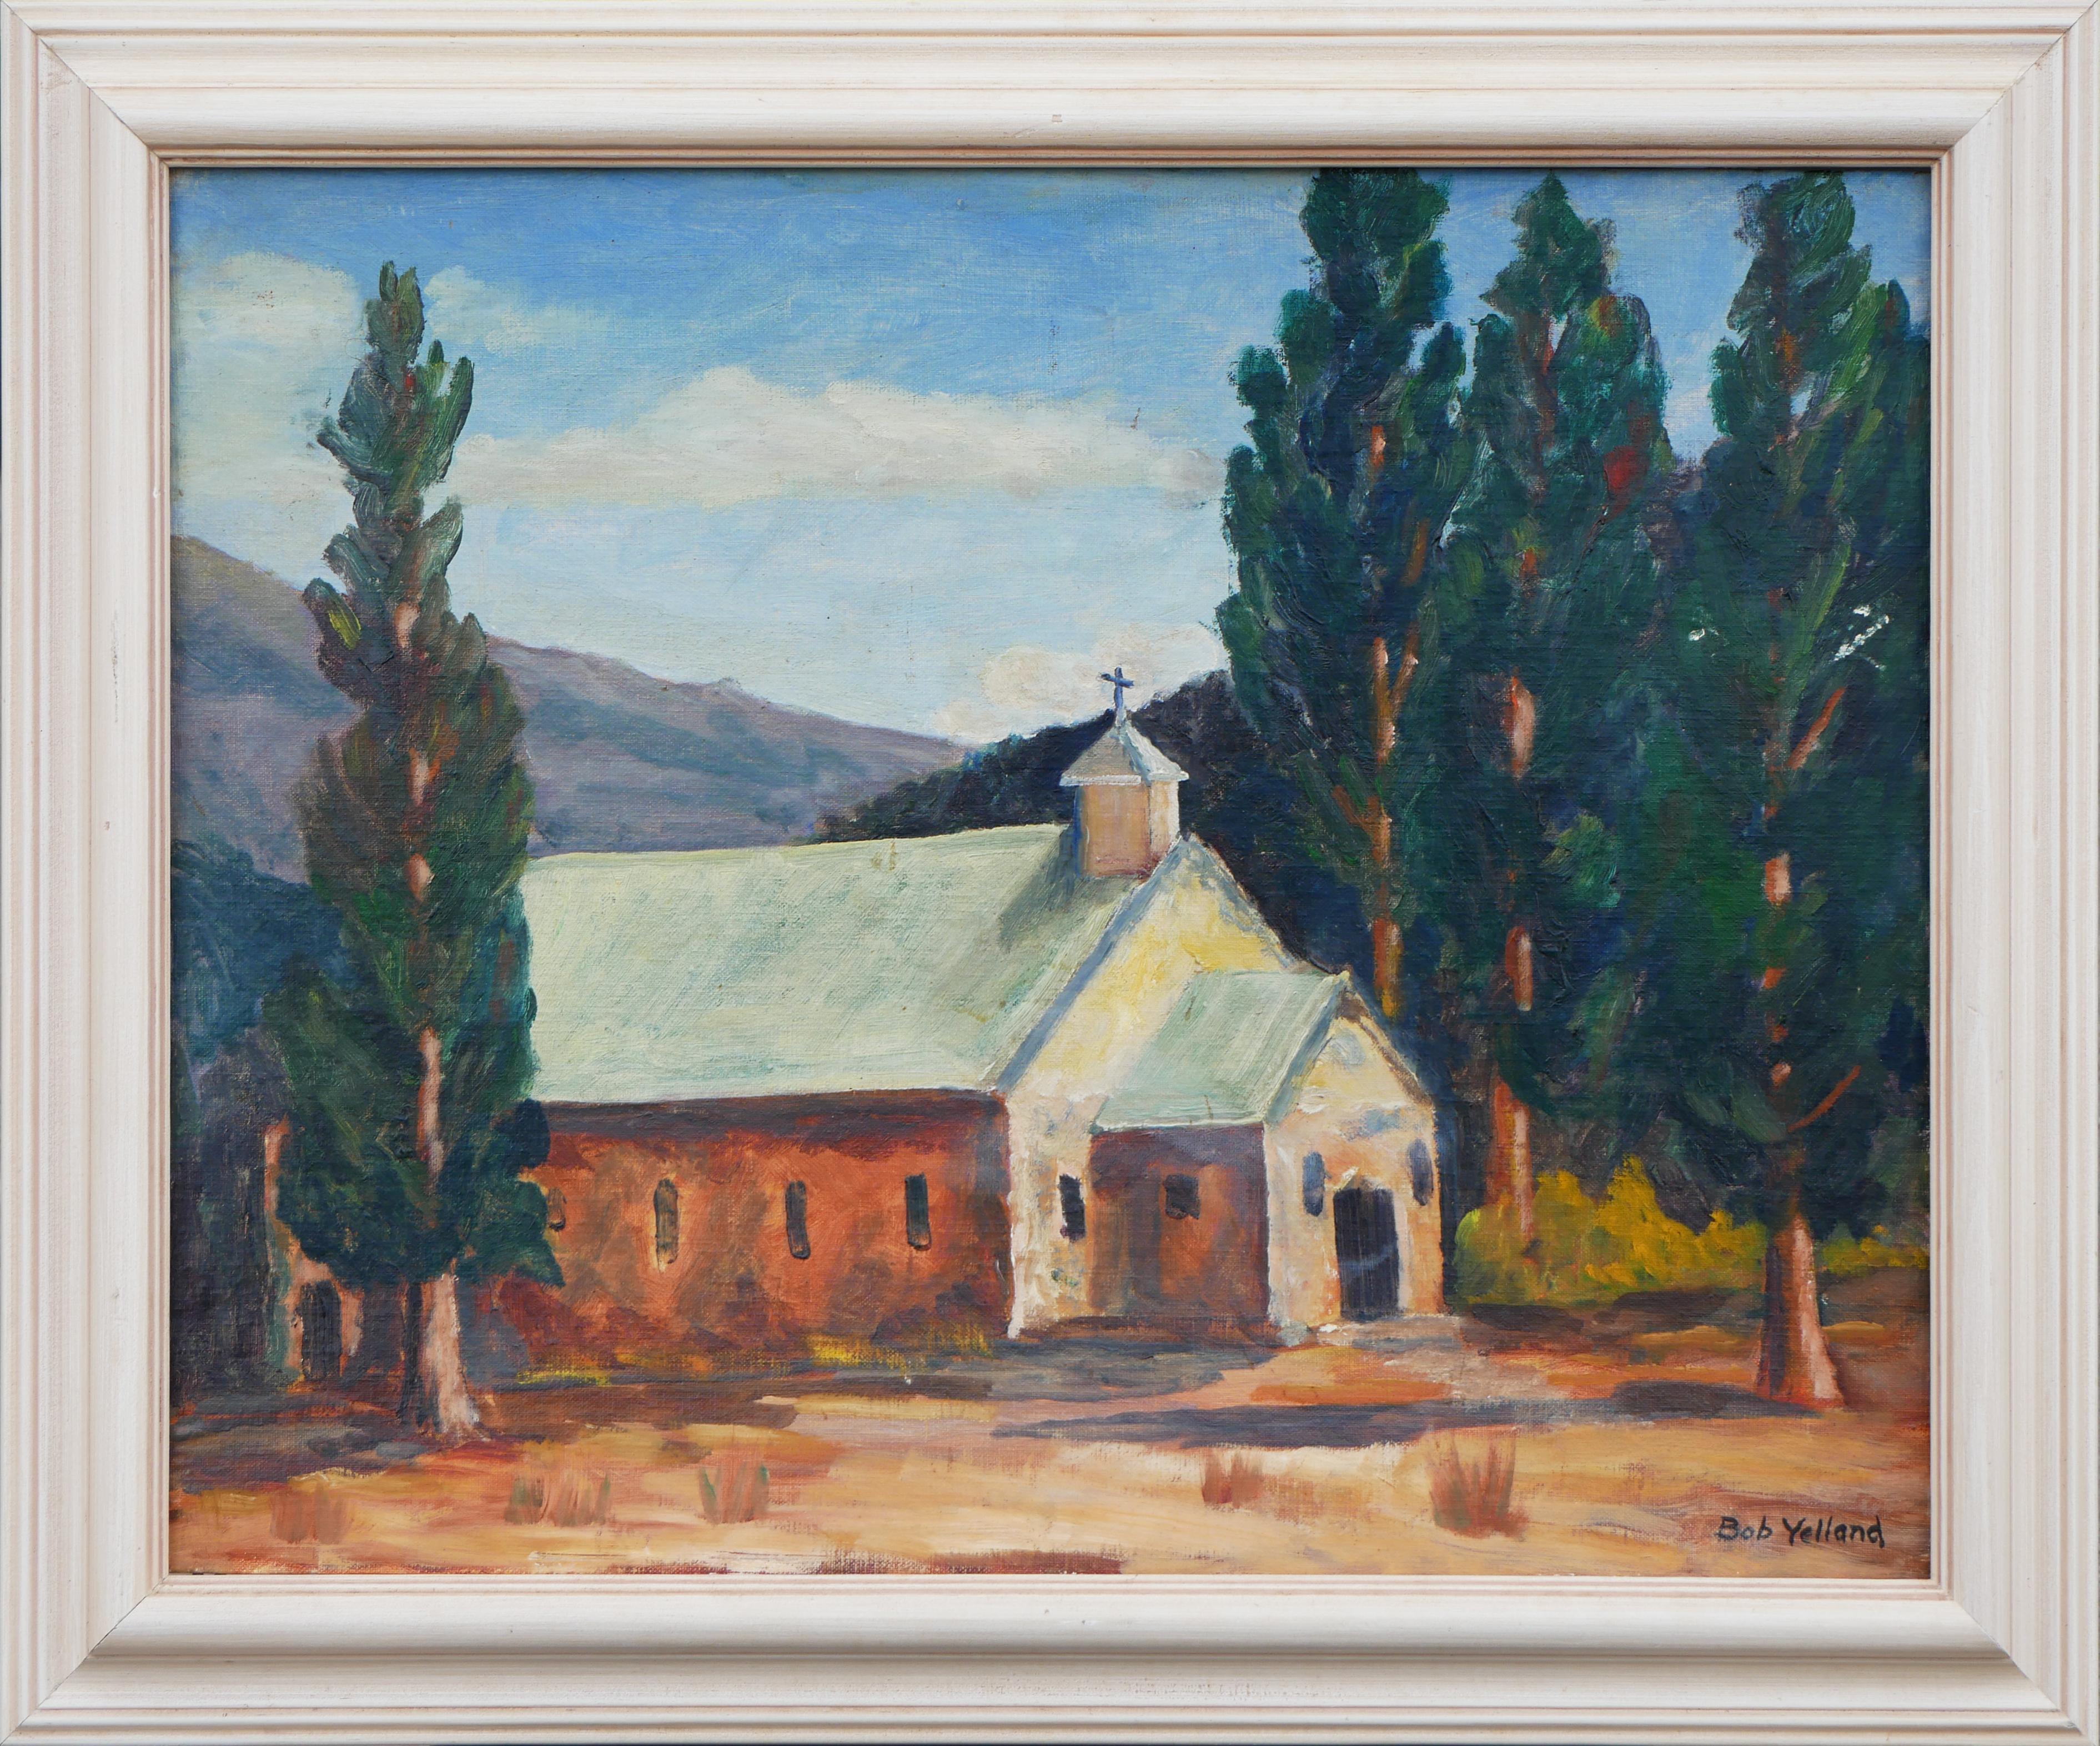 Orange, brown, green, and blue abstract landscape painting by Bob Yelland. The painting depicts a small chapel in the middle of a desert surrounded by tall trees. Signed by the artist at the bottom right. Framed in a white wooden frame.

Dimensions